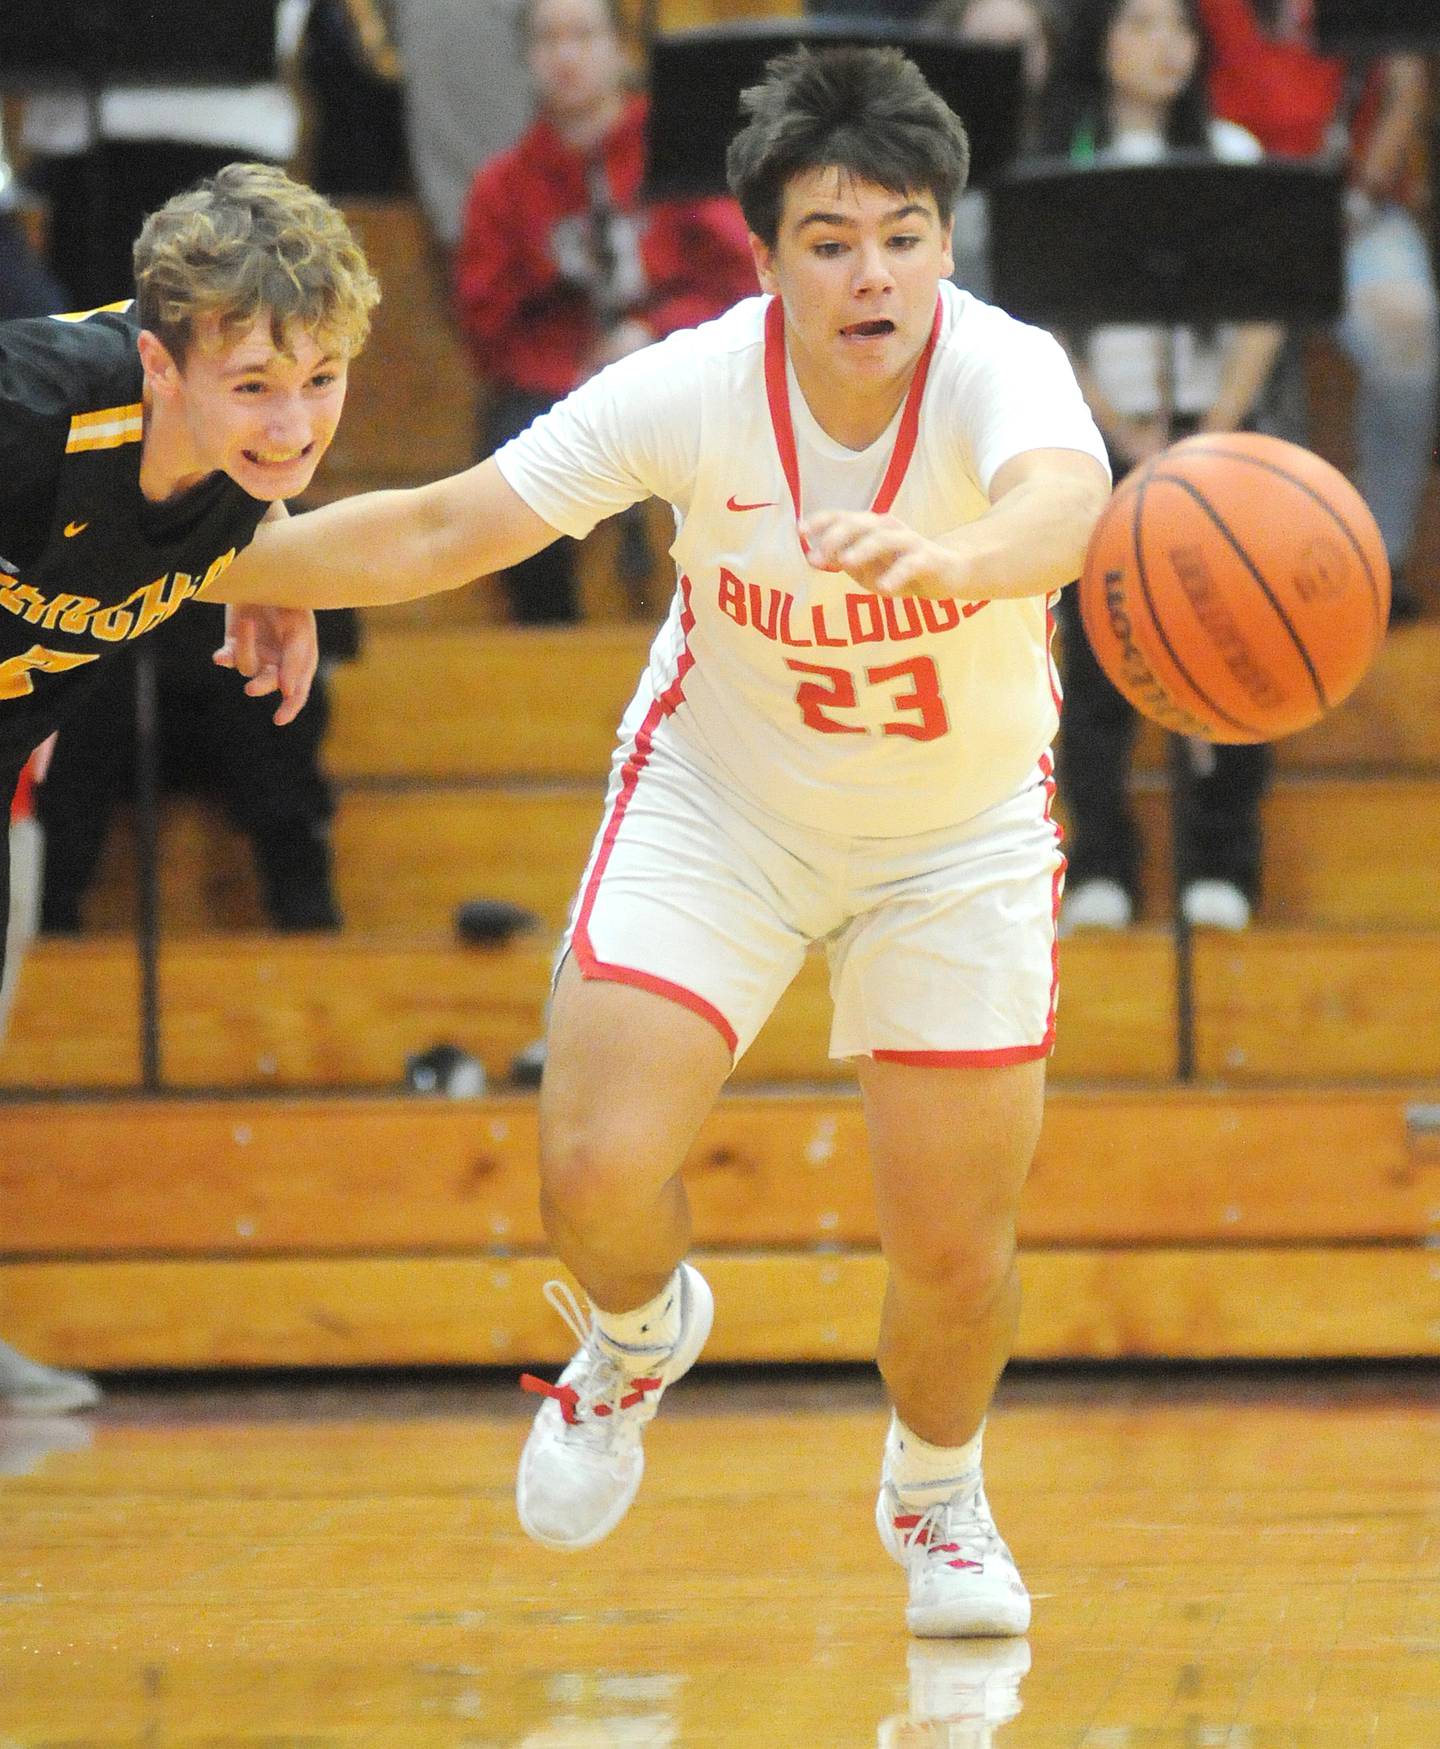 Streator's Logan Aukland (23) steals the ball from Herscher's Austin Buckley in the second quarter at Pops Dale Gymnasium on Dec. 1, 2023.